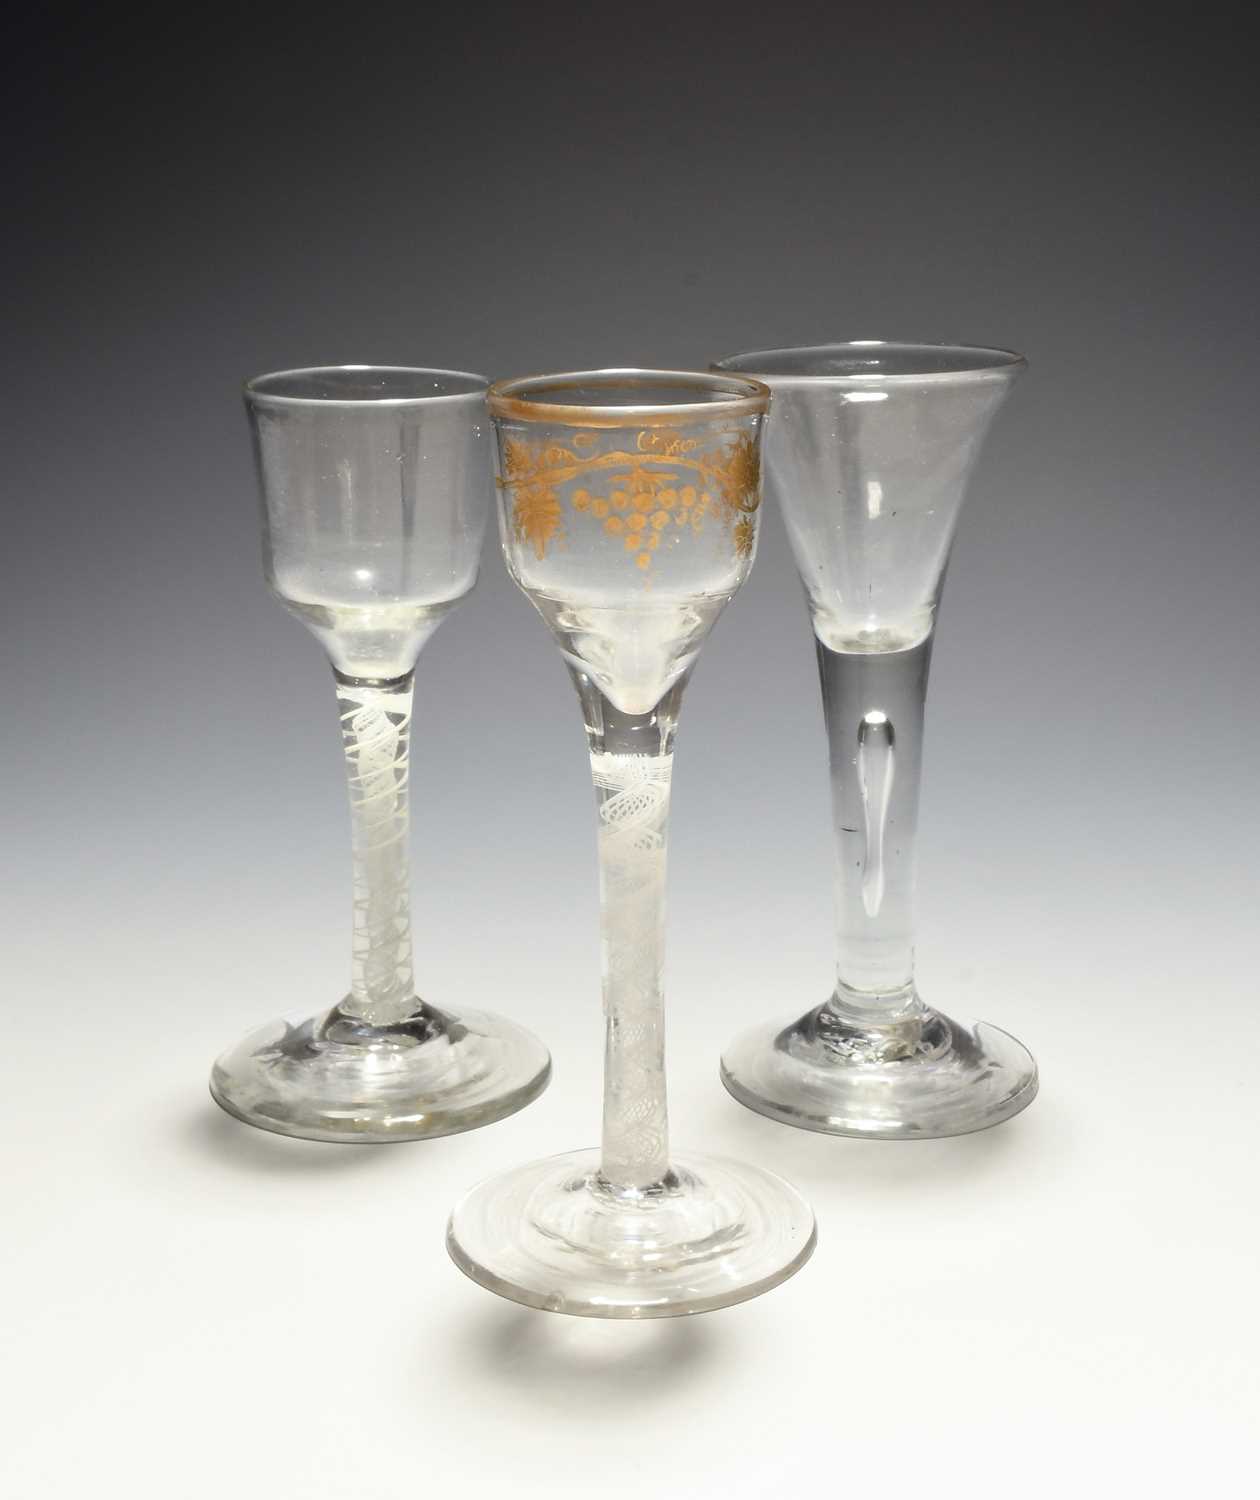 Three small wine glasses, c.1750-70, two with ogee bowls, one gilded with grapevine, both raised